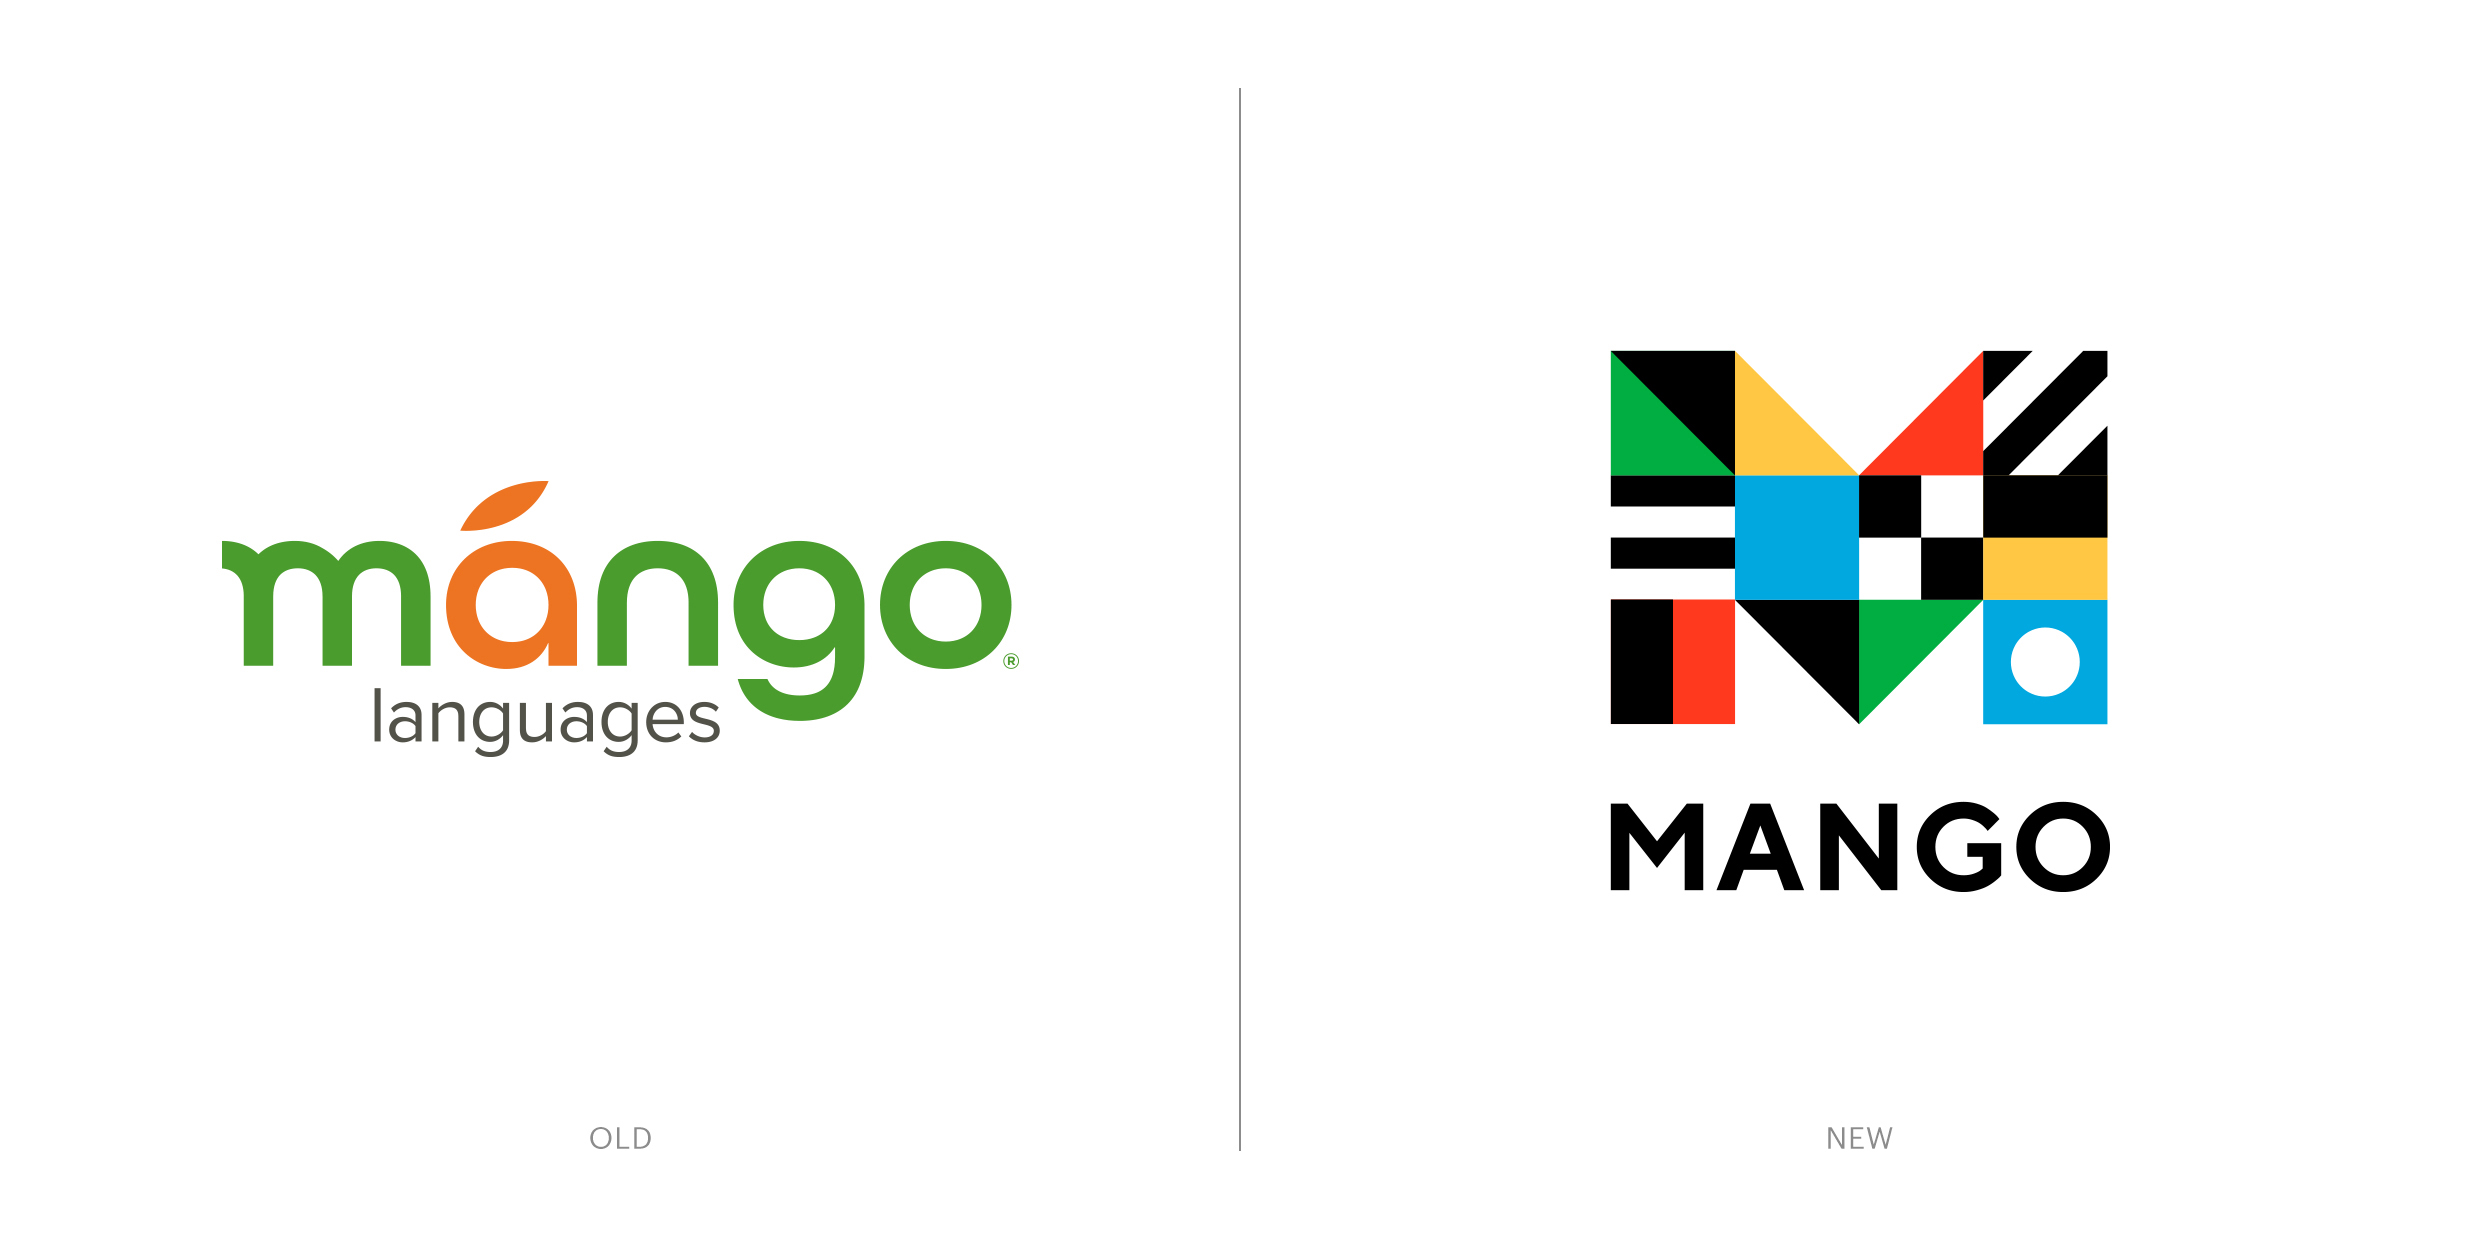 The Office of Experience Announces New Brand Identity for Mango Languages